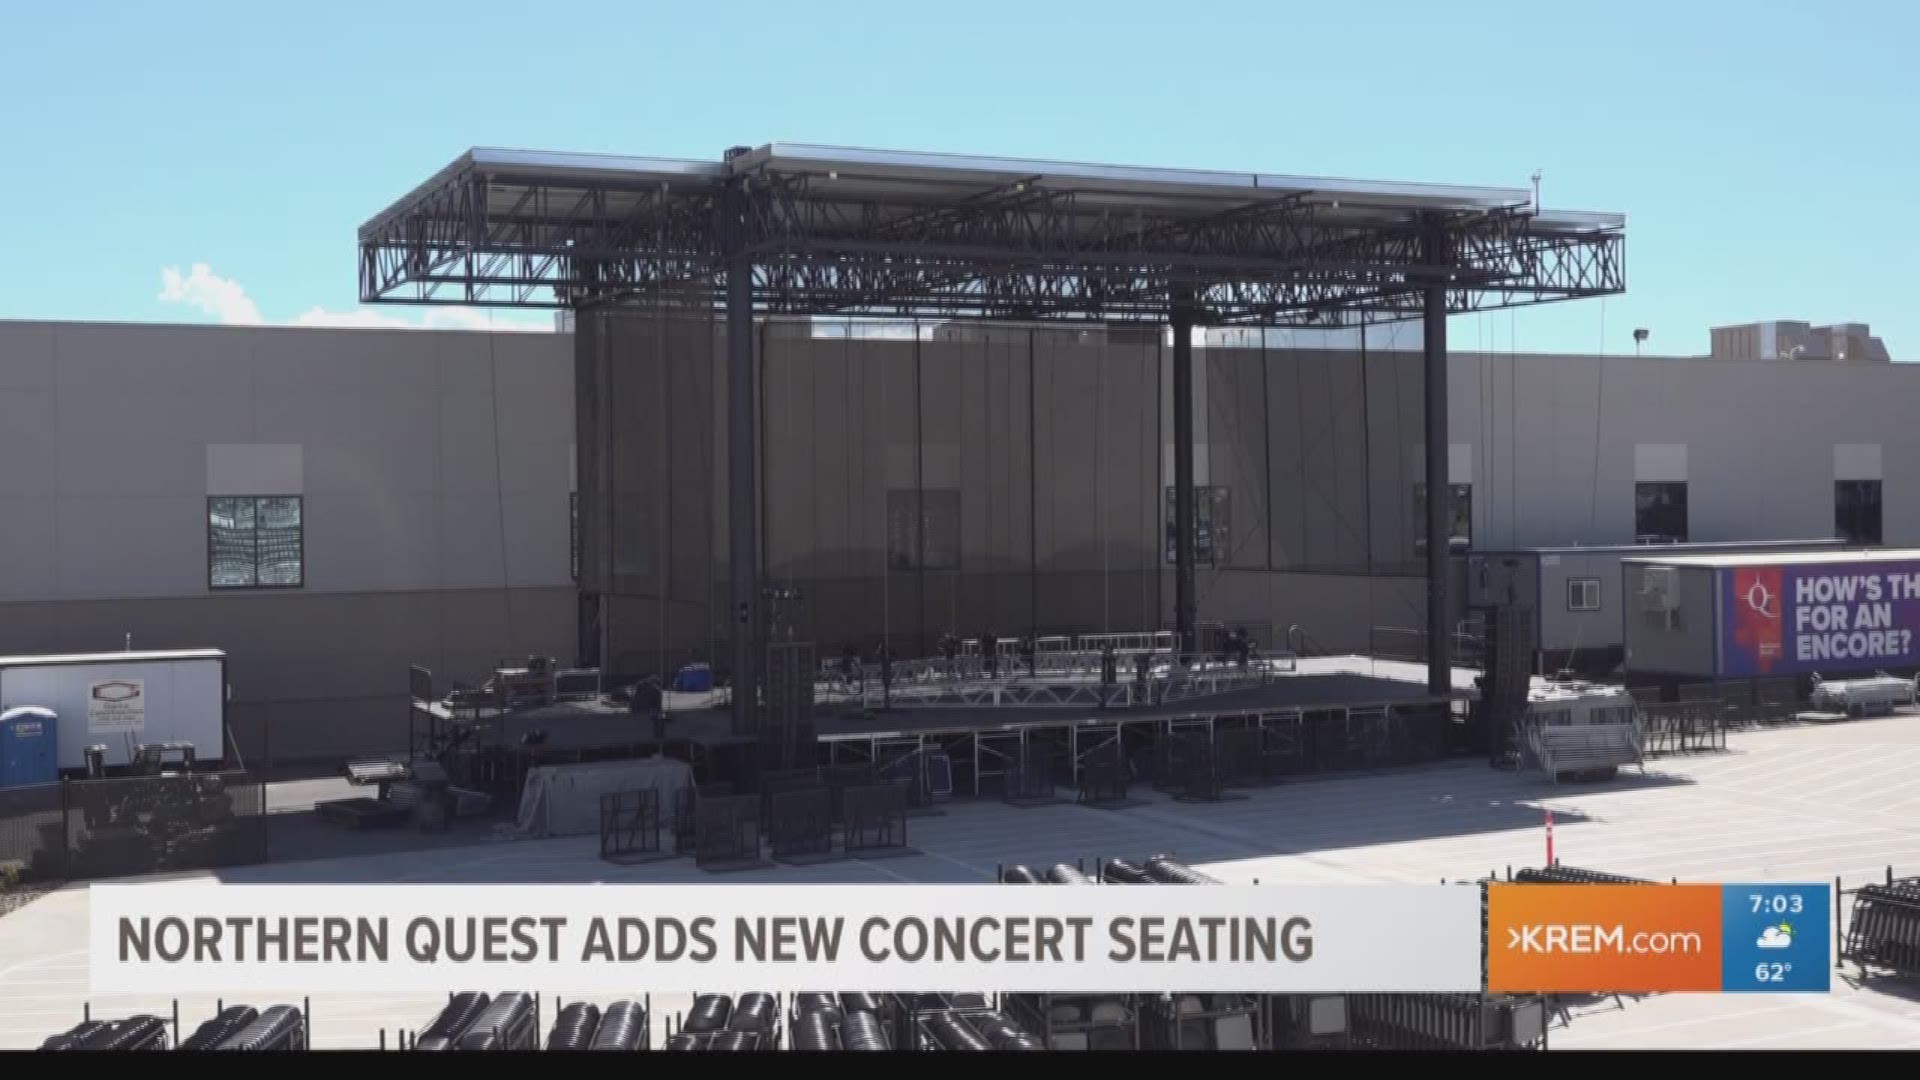 Northern Quest adds new concert seating to venue